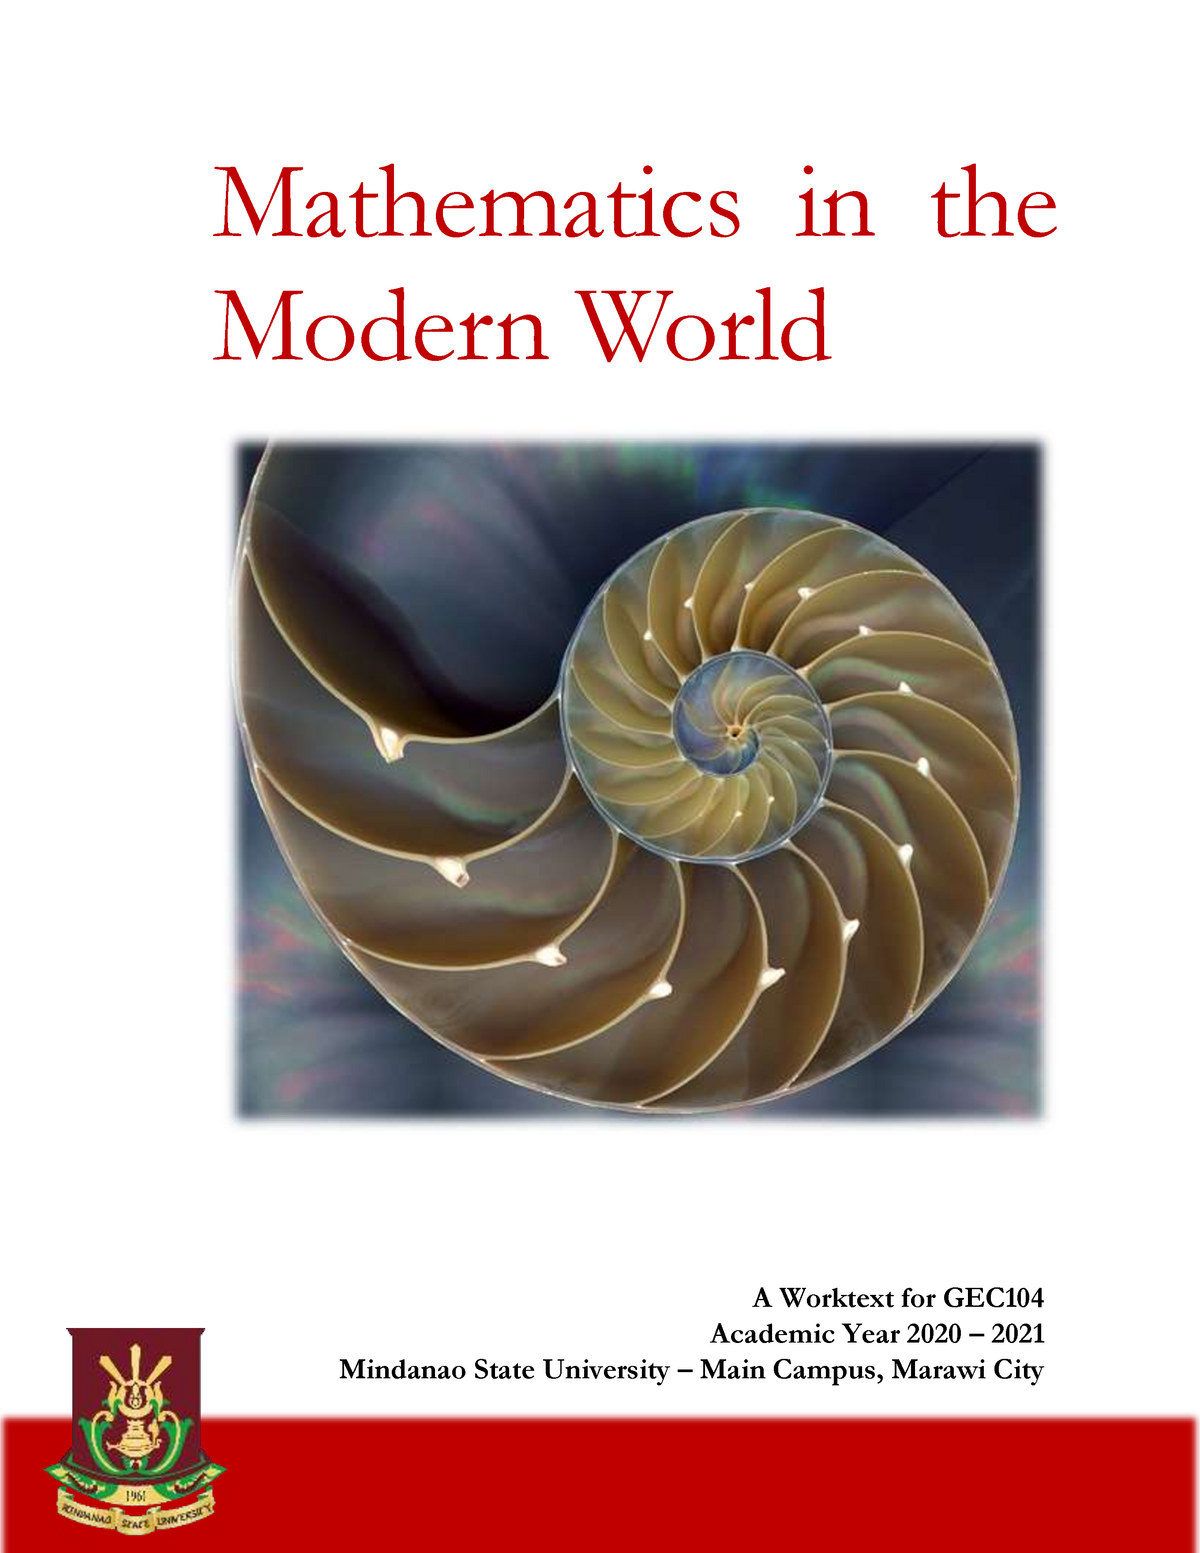 math-in-modern-world-lecture-notes-1-mathematics-in-the-modern